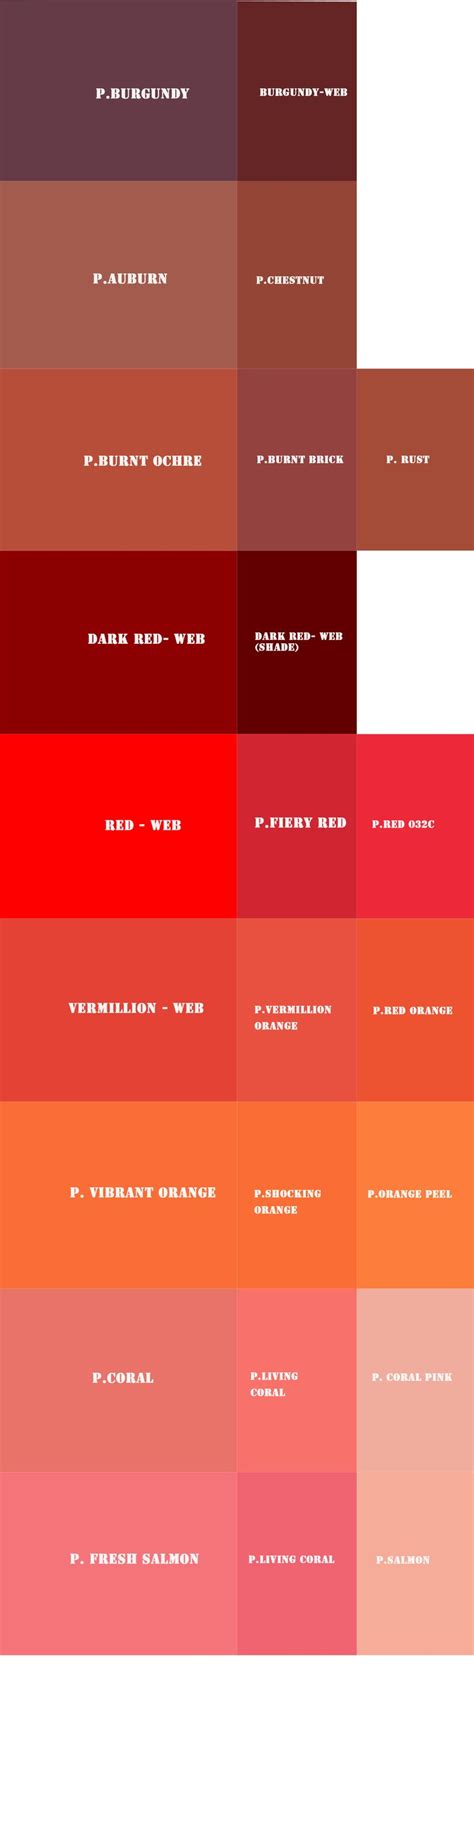 152 Best Images About Color Theory On Pinterest Pantone Color Wheels